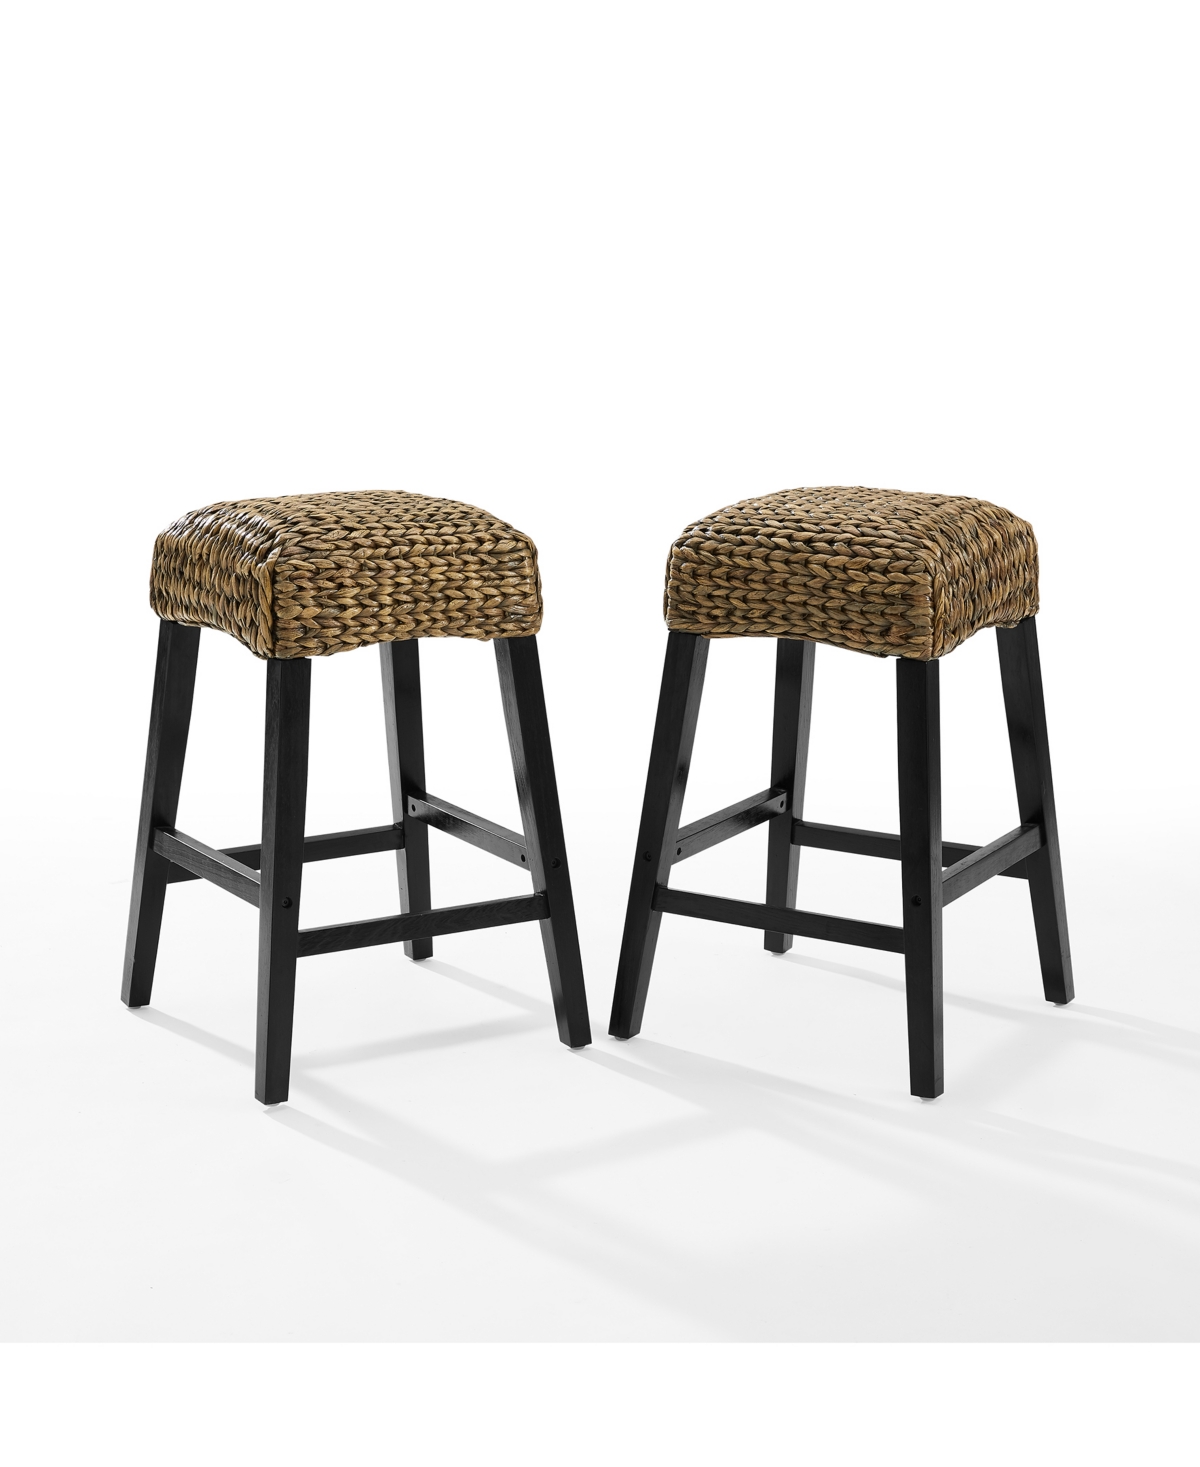 Crosley Edgewater 2-piece Seagrass Backless Counter Height Bar Stool Set